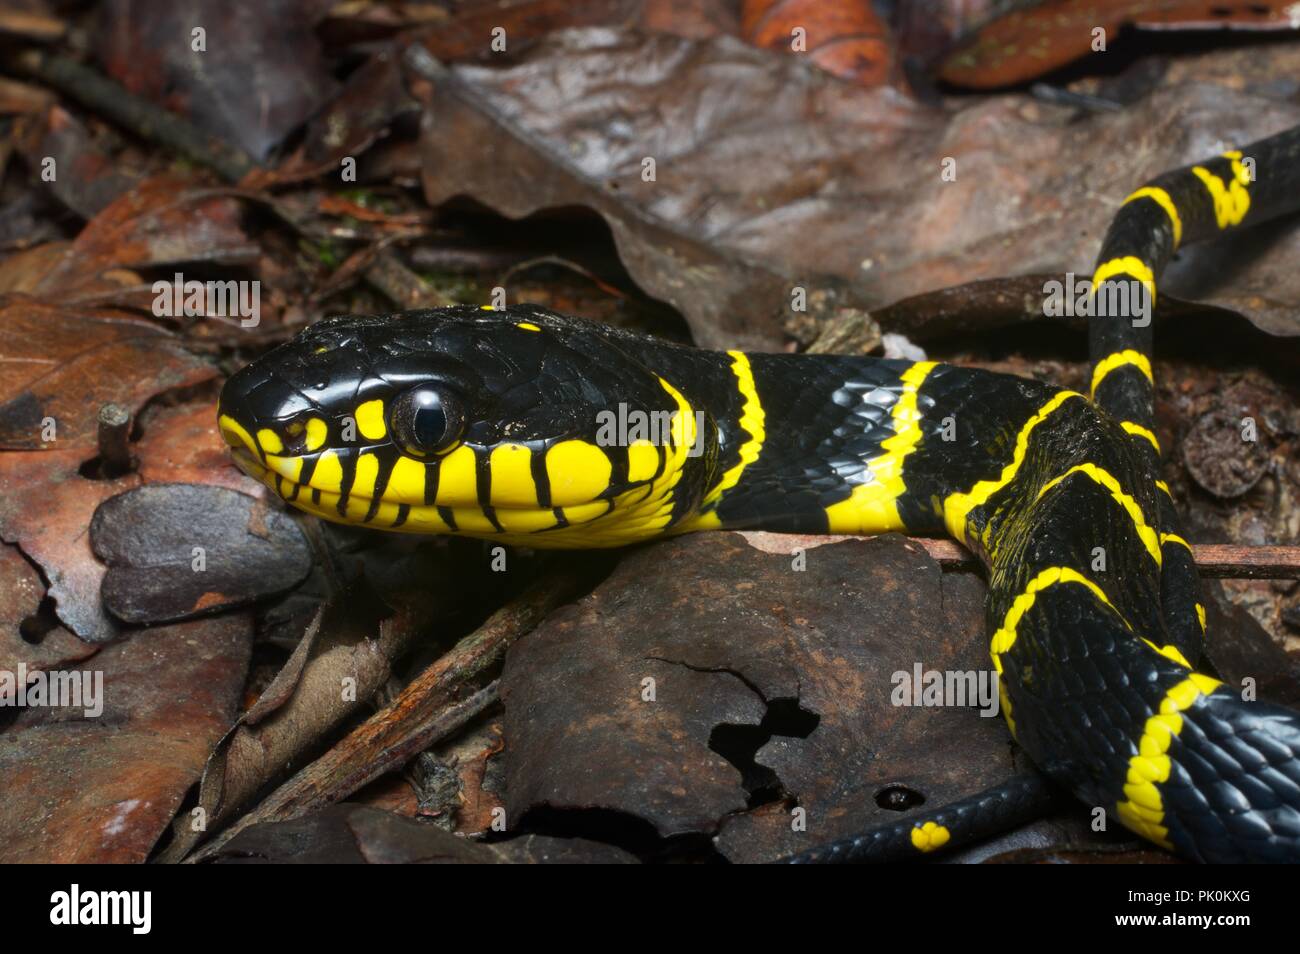 A Mangrove Cat Snake (Boiga dendrophila annectens) on the forest floor in Gunung Mulu National Park, Sarawak, East Malaysia, Borneo Stock Photo